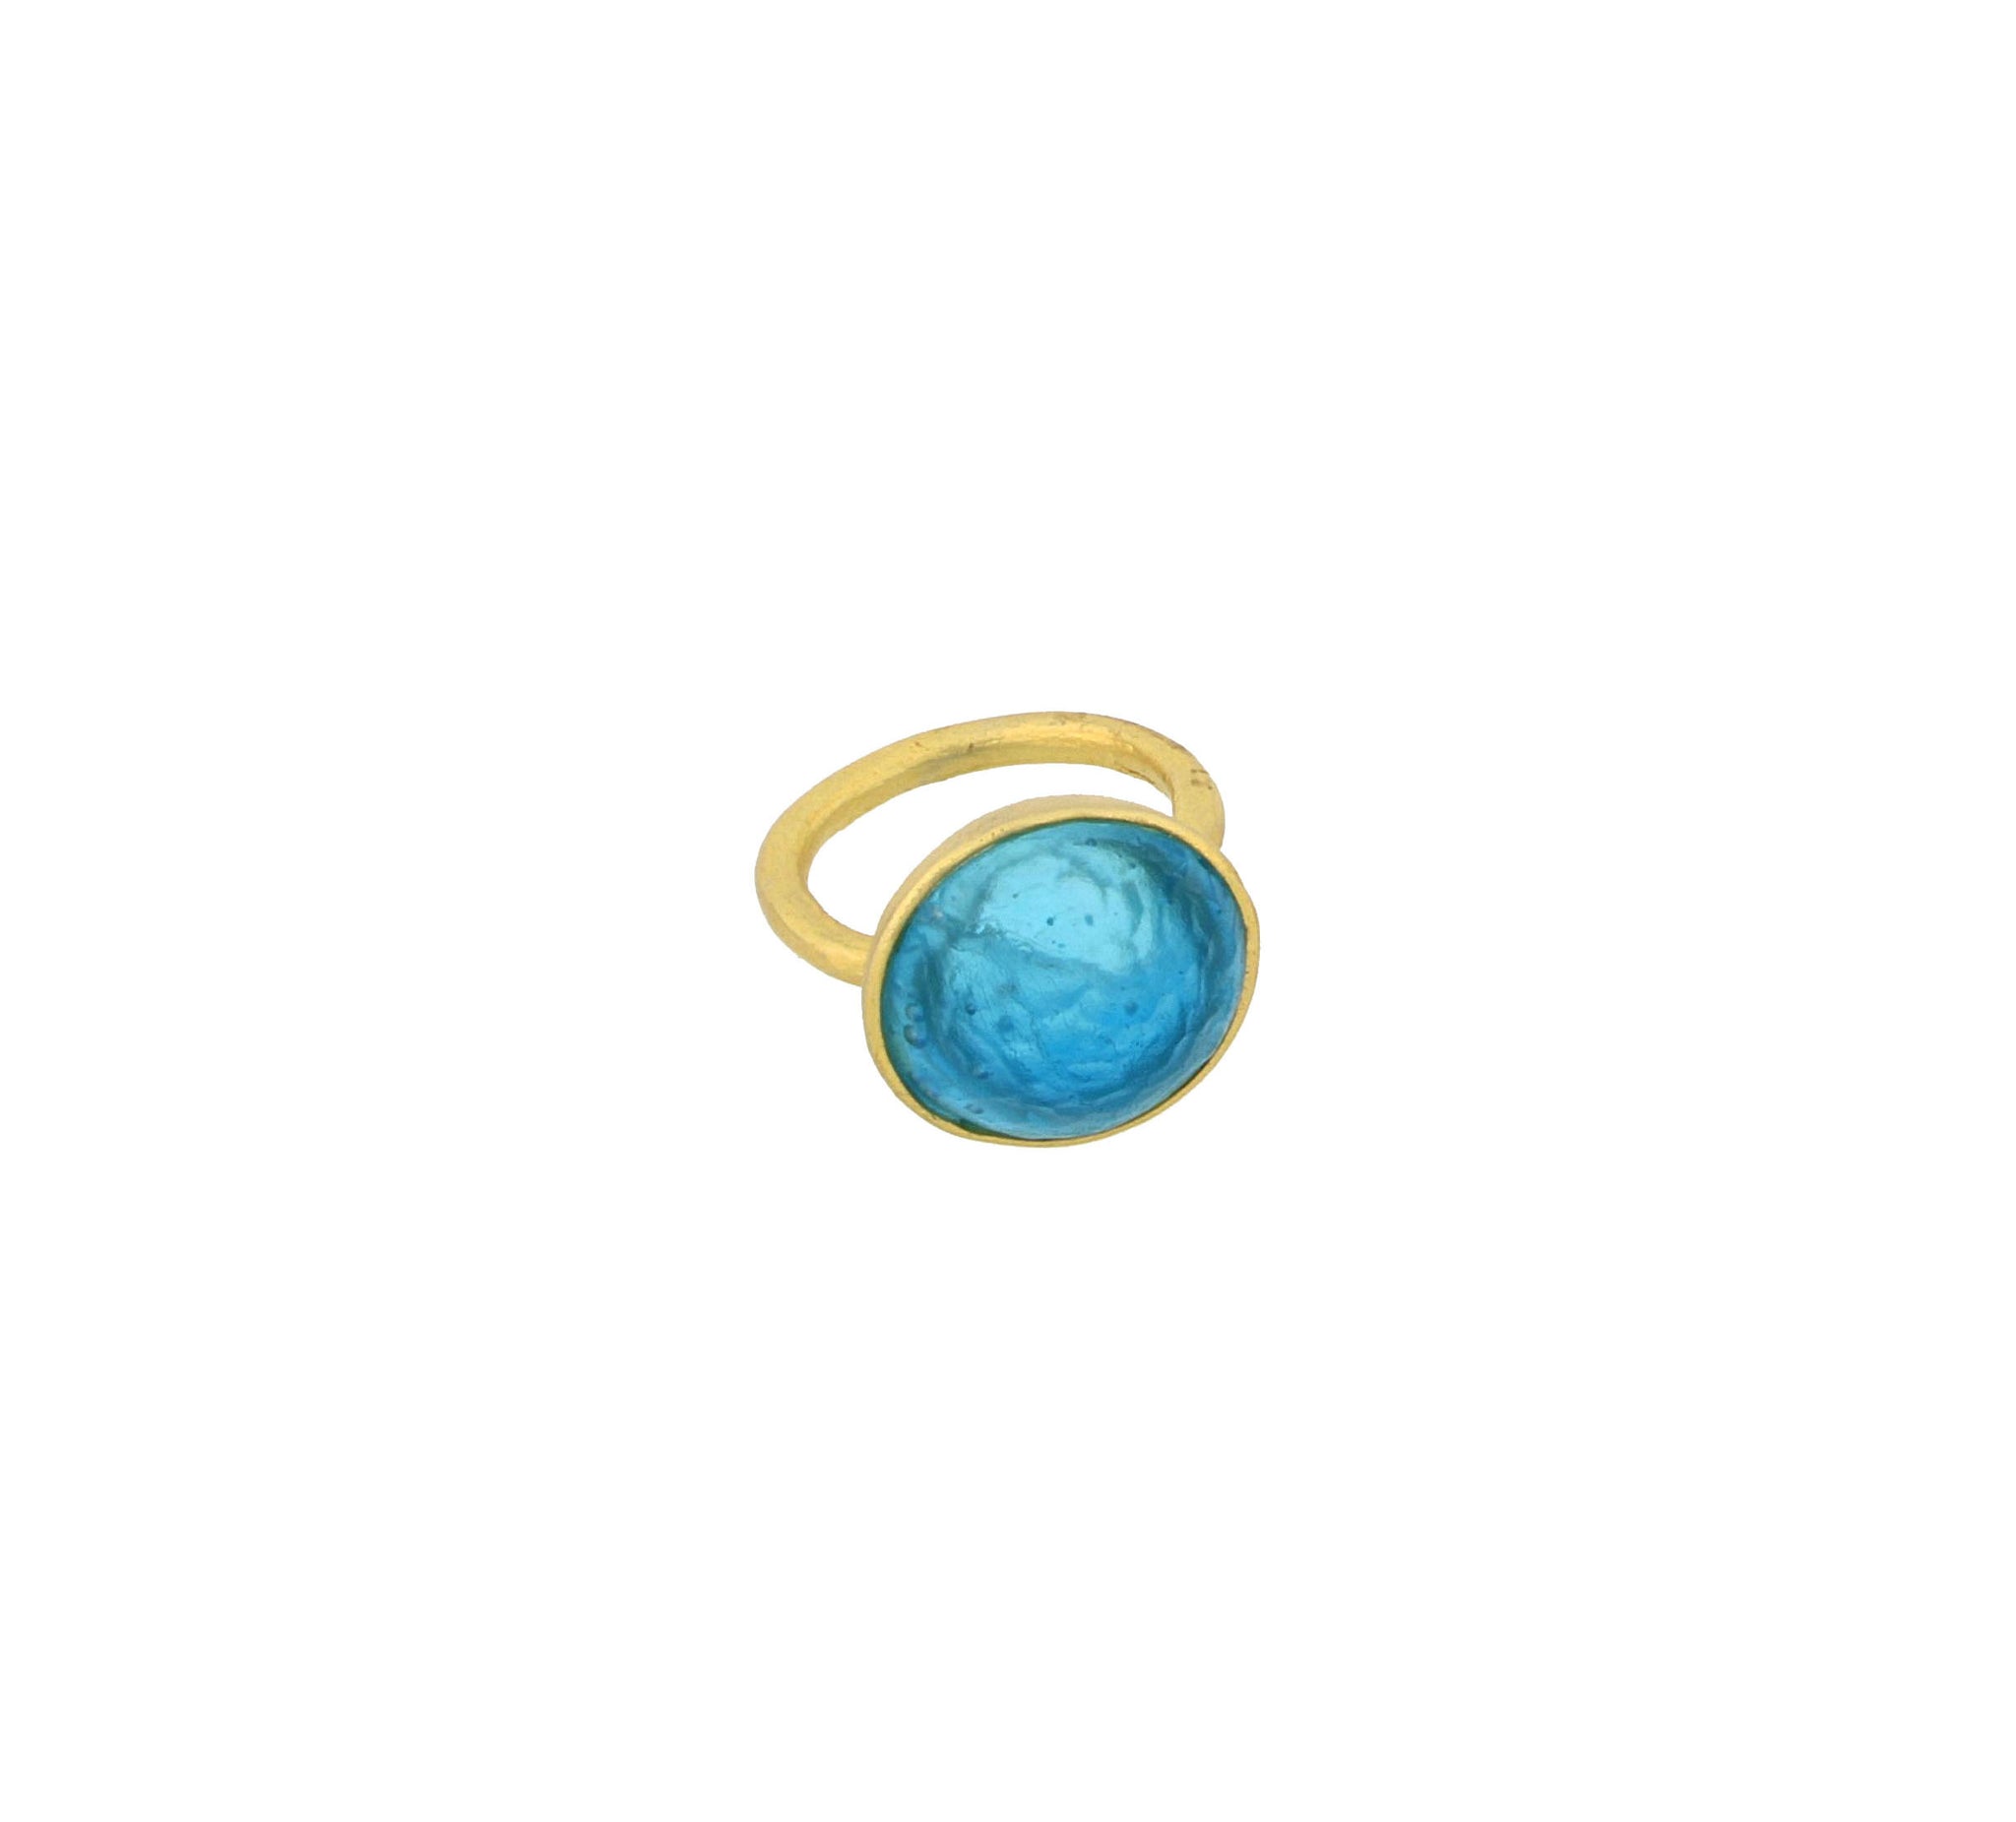 24k gold ring with aqua glass